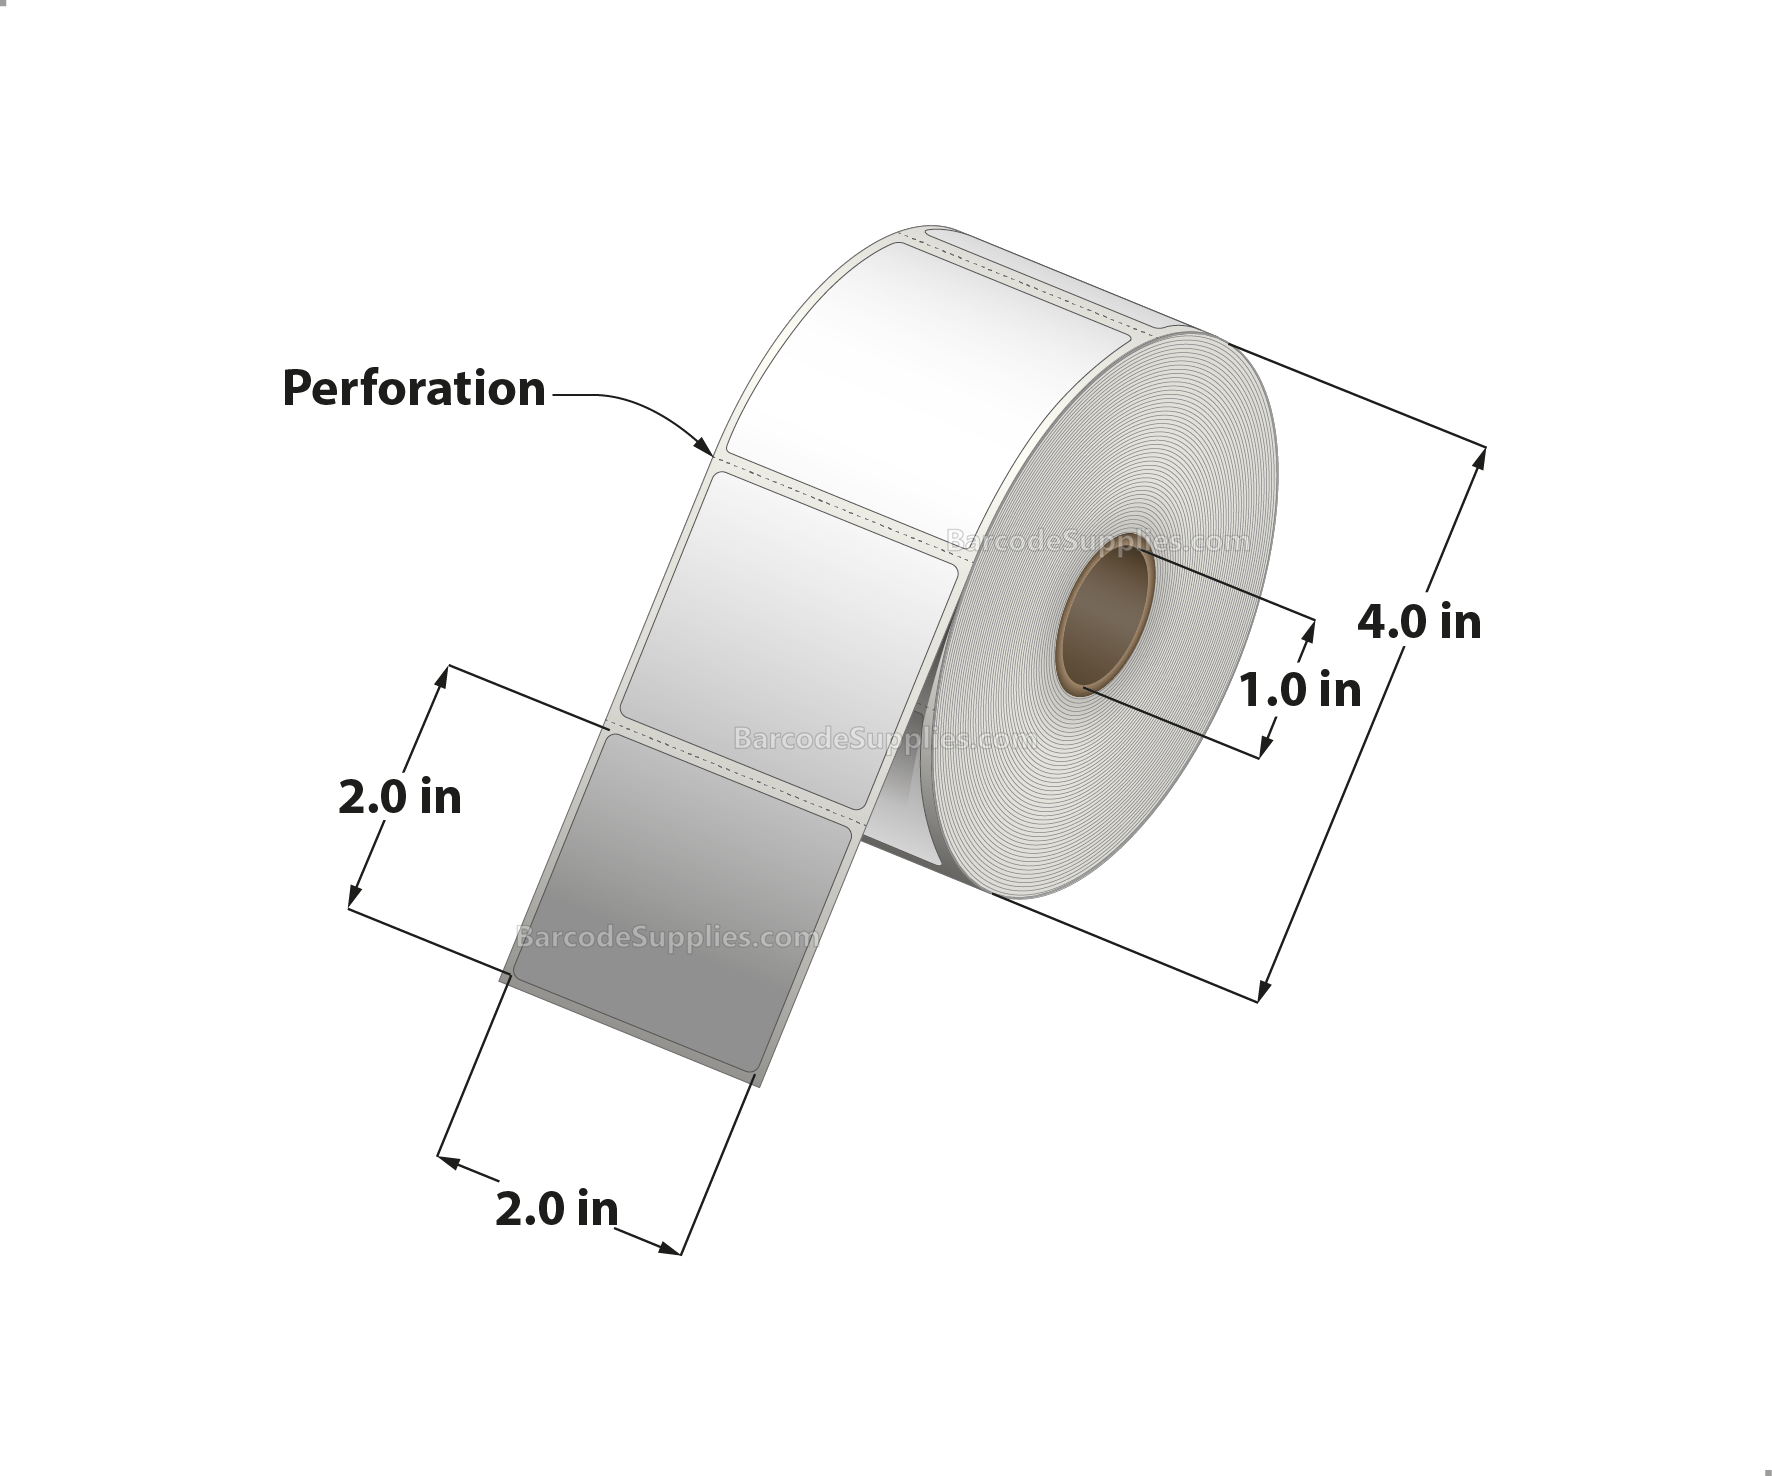 2 x 2 Direct Thermal White Labels With Acrylic Adhesive - Perforated - 735 Labels Per Roll - Carton Of 12 Rolls - 8820 Labels Total - MPN: RD-2-2-735-1